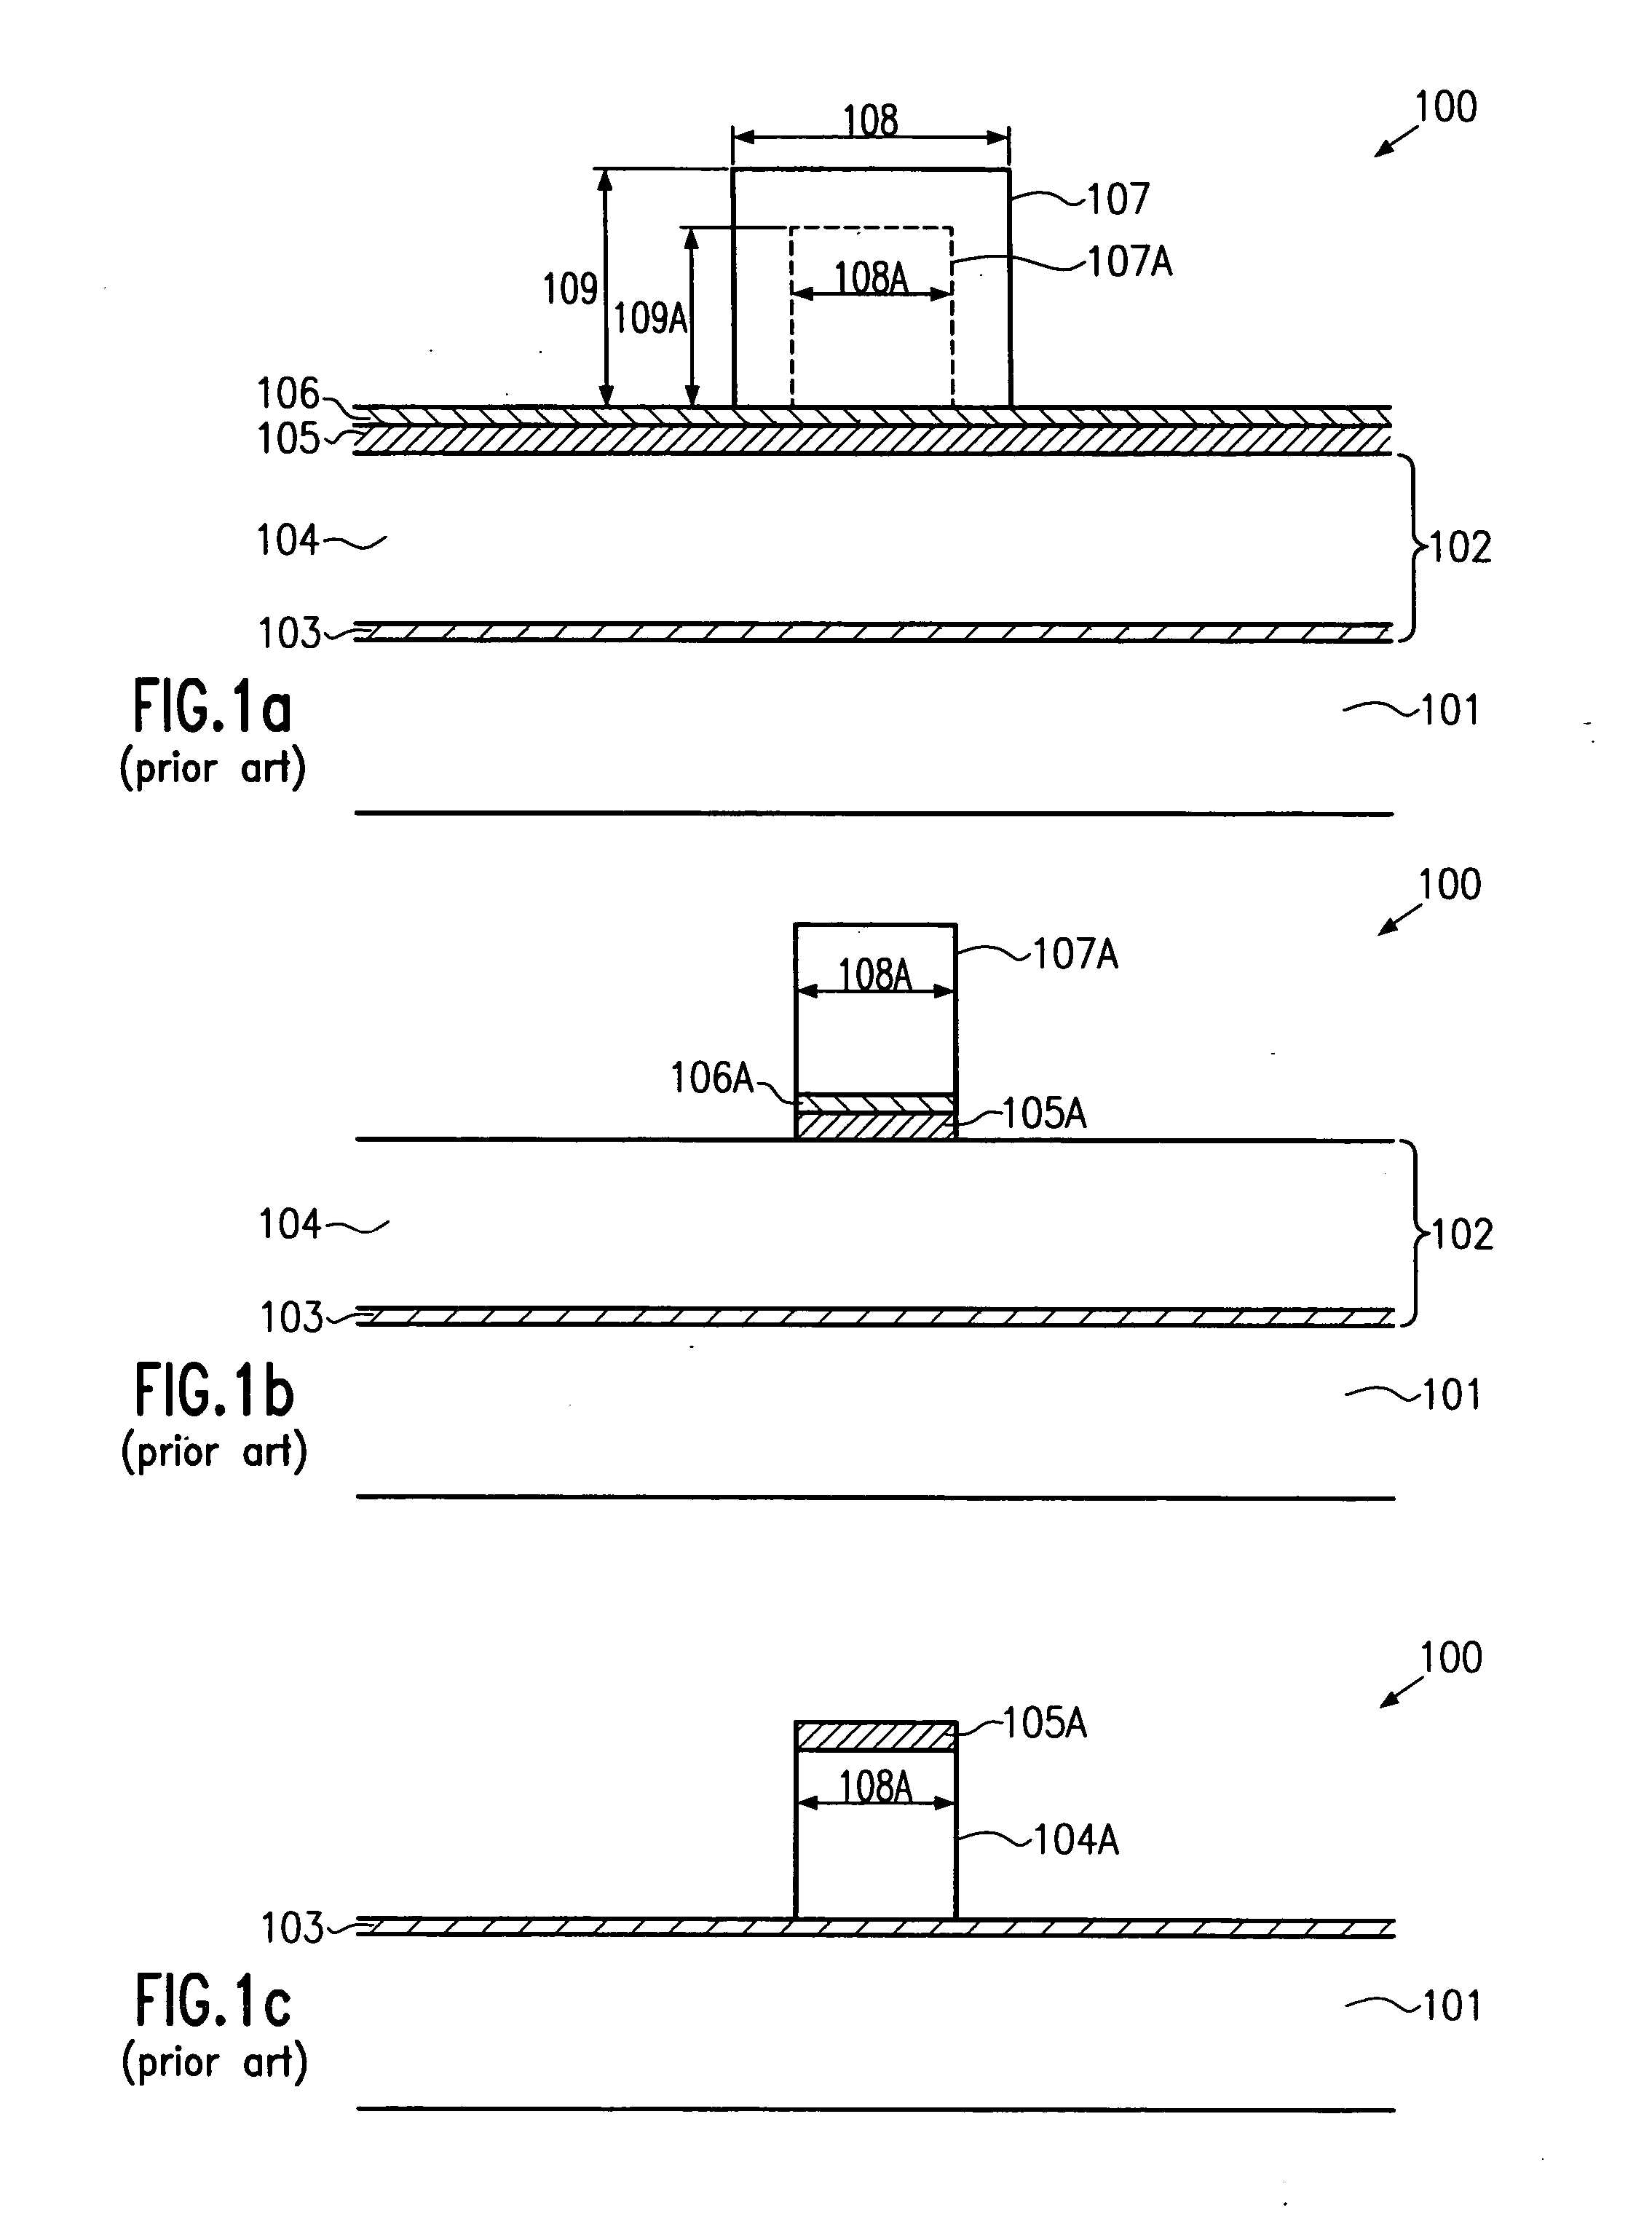 Method of forming a teos cap layer at low temperature and reduced deposition rate